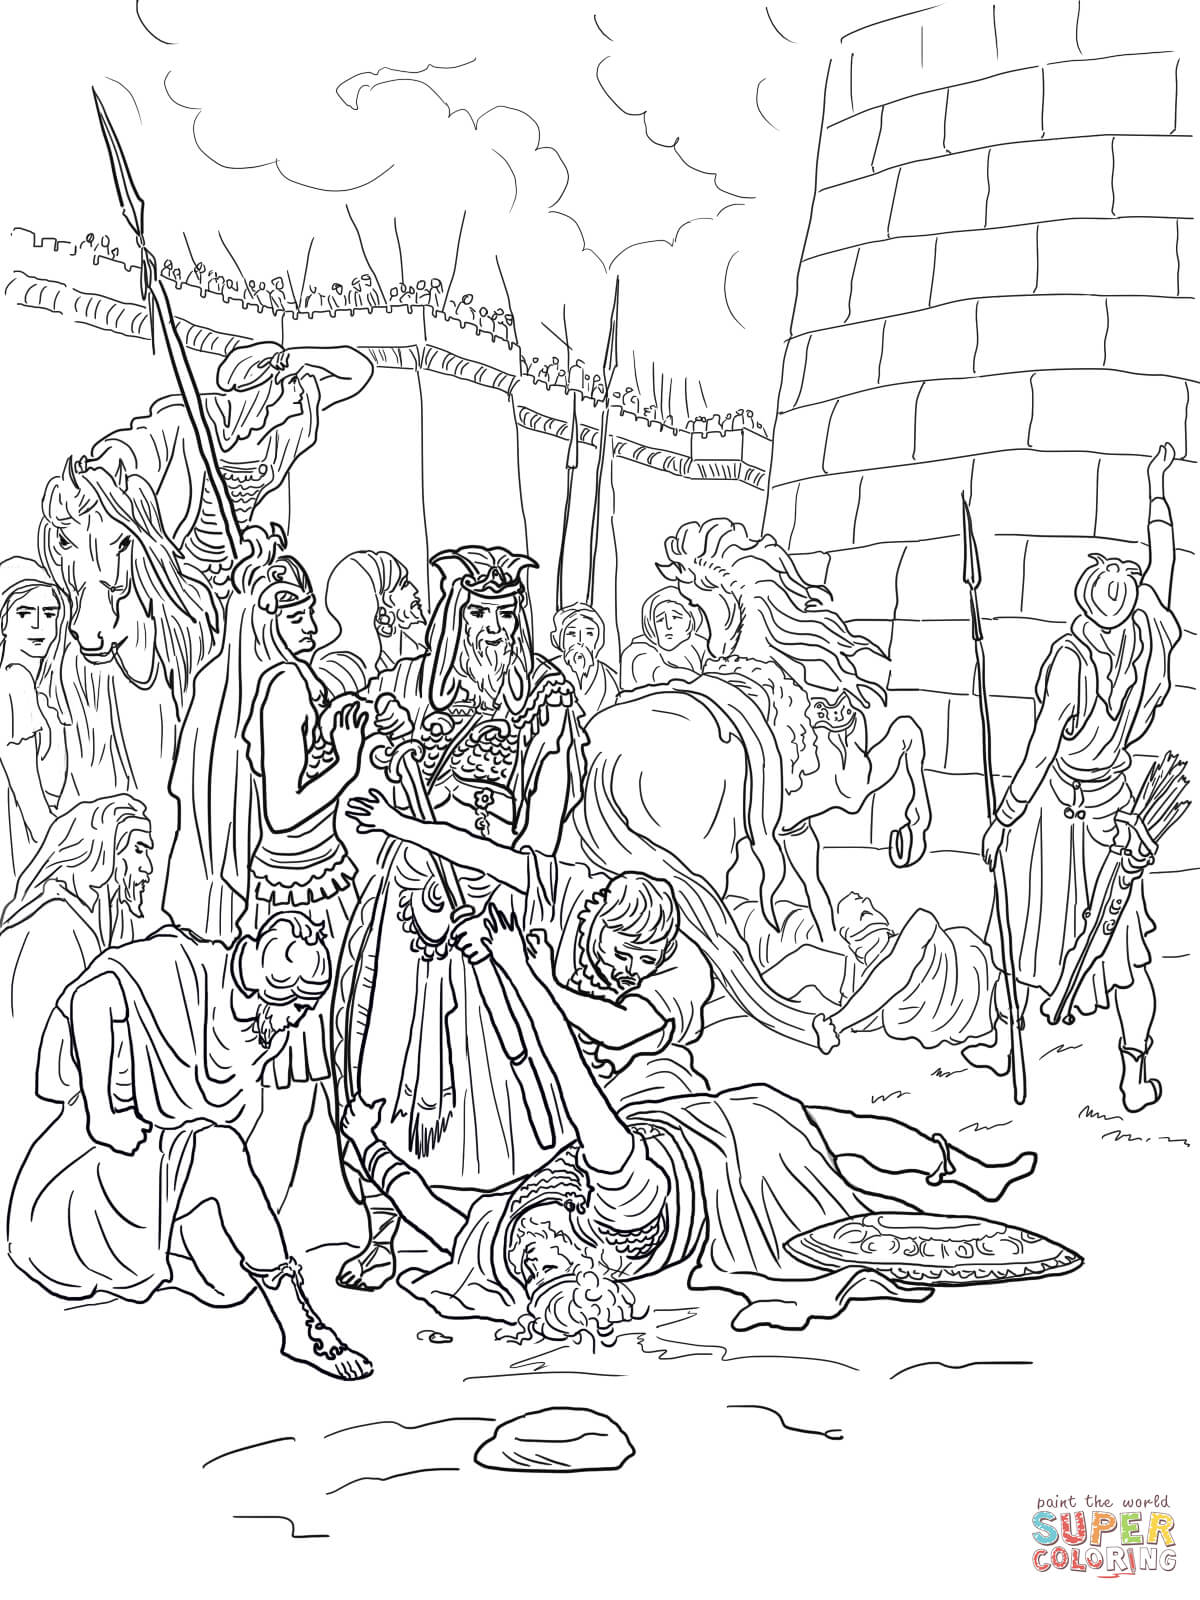 The Death of Abimelech coloring page | Free Printable Coloring Pages